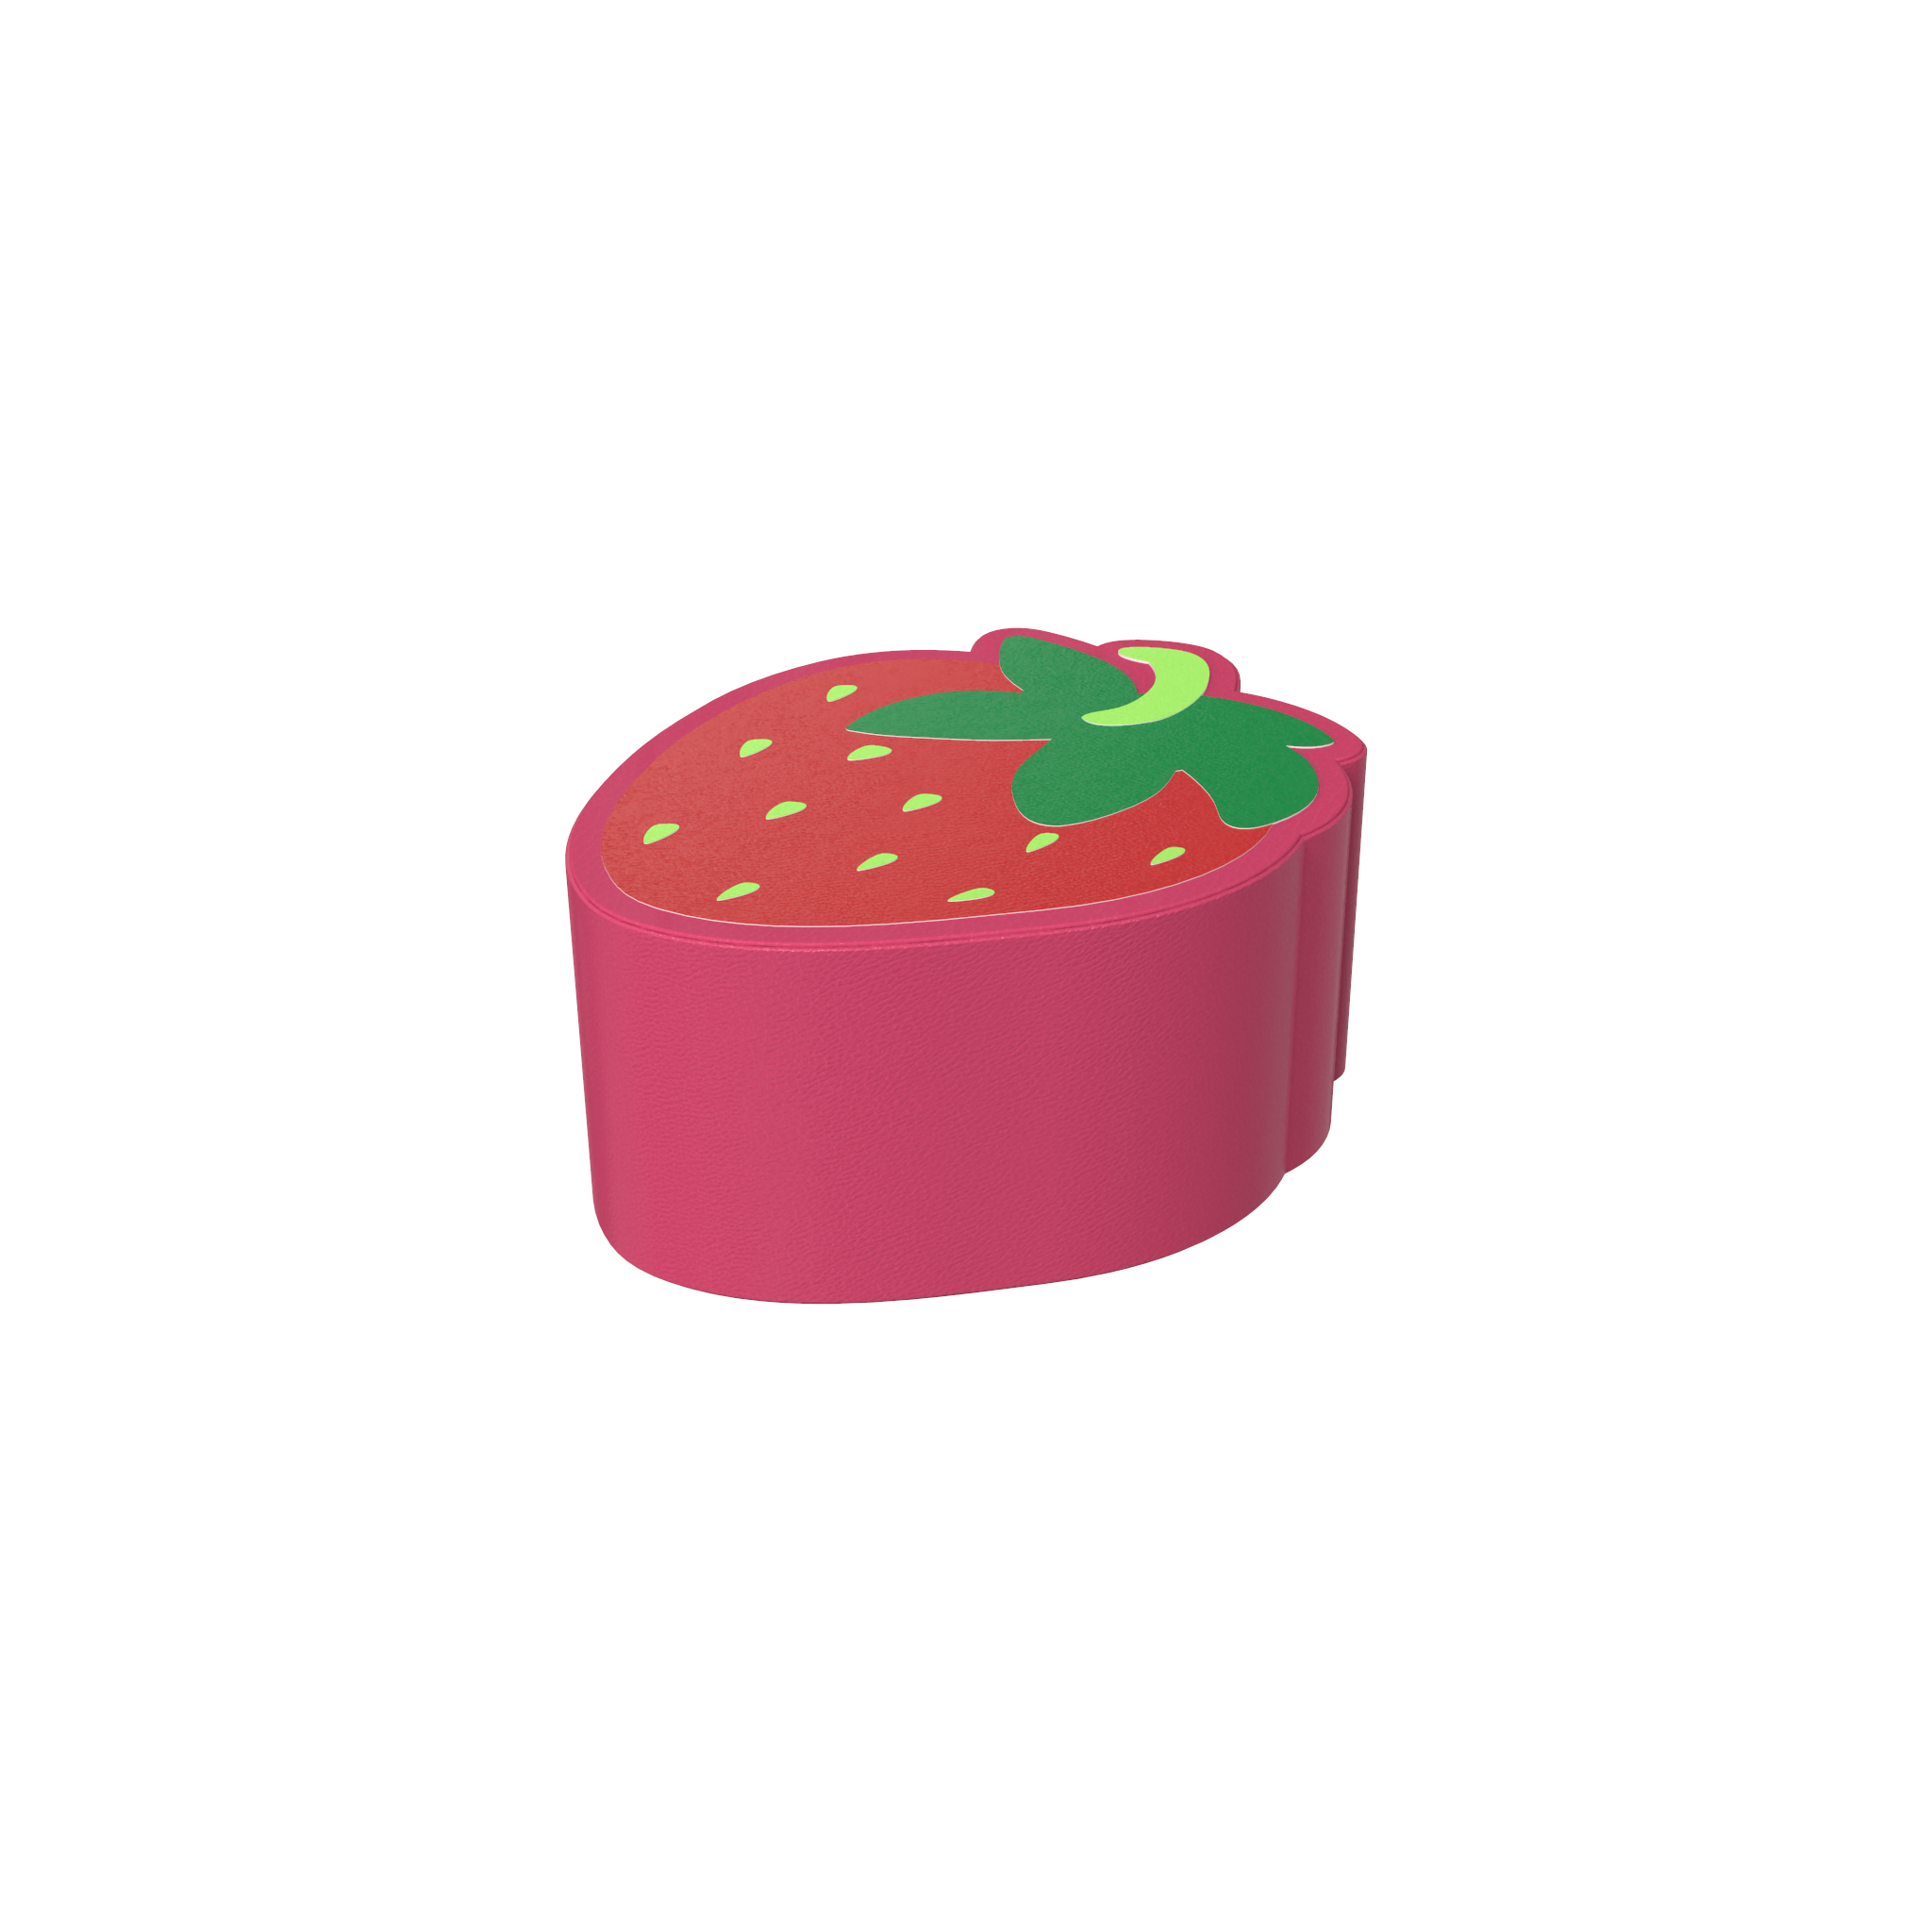 This image shows a soft play Strawberry